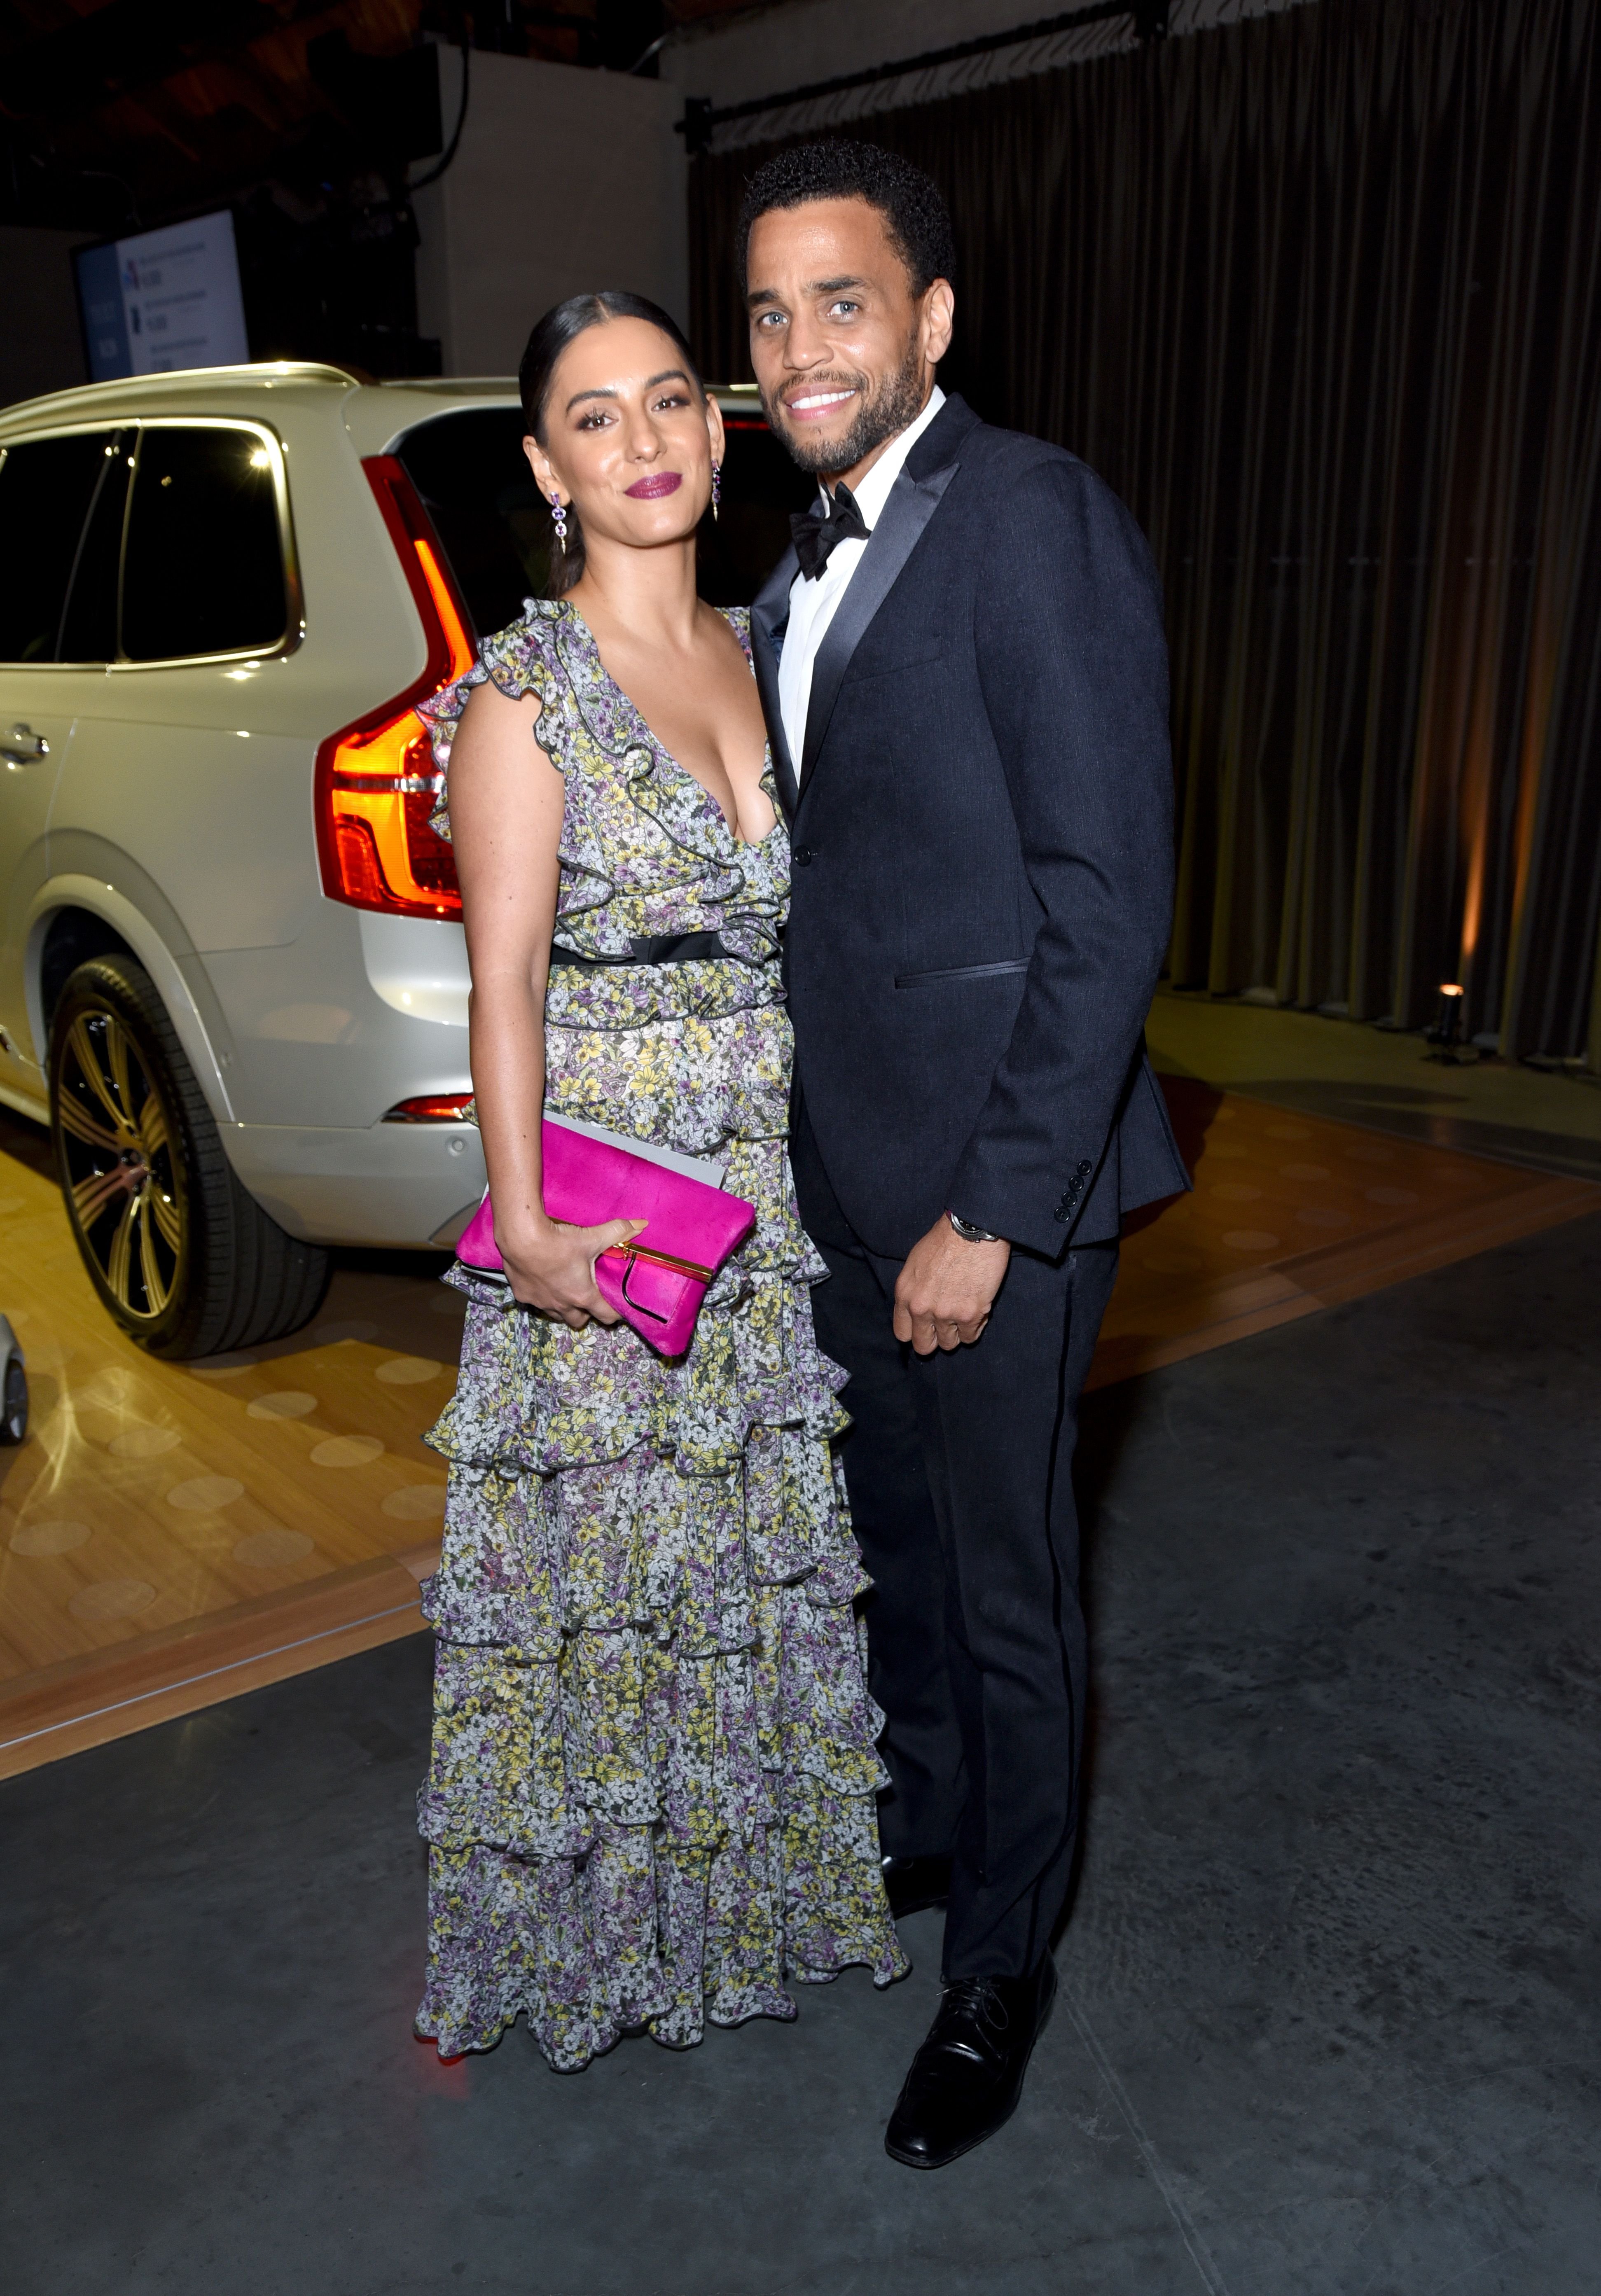 Khatira Rafiqzada and Michael Ealy at the Baby2Baby Gala on November 09, 2019, in Los Angeles, California | Photo: Presley Ann/Getty Images